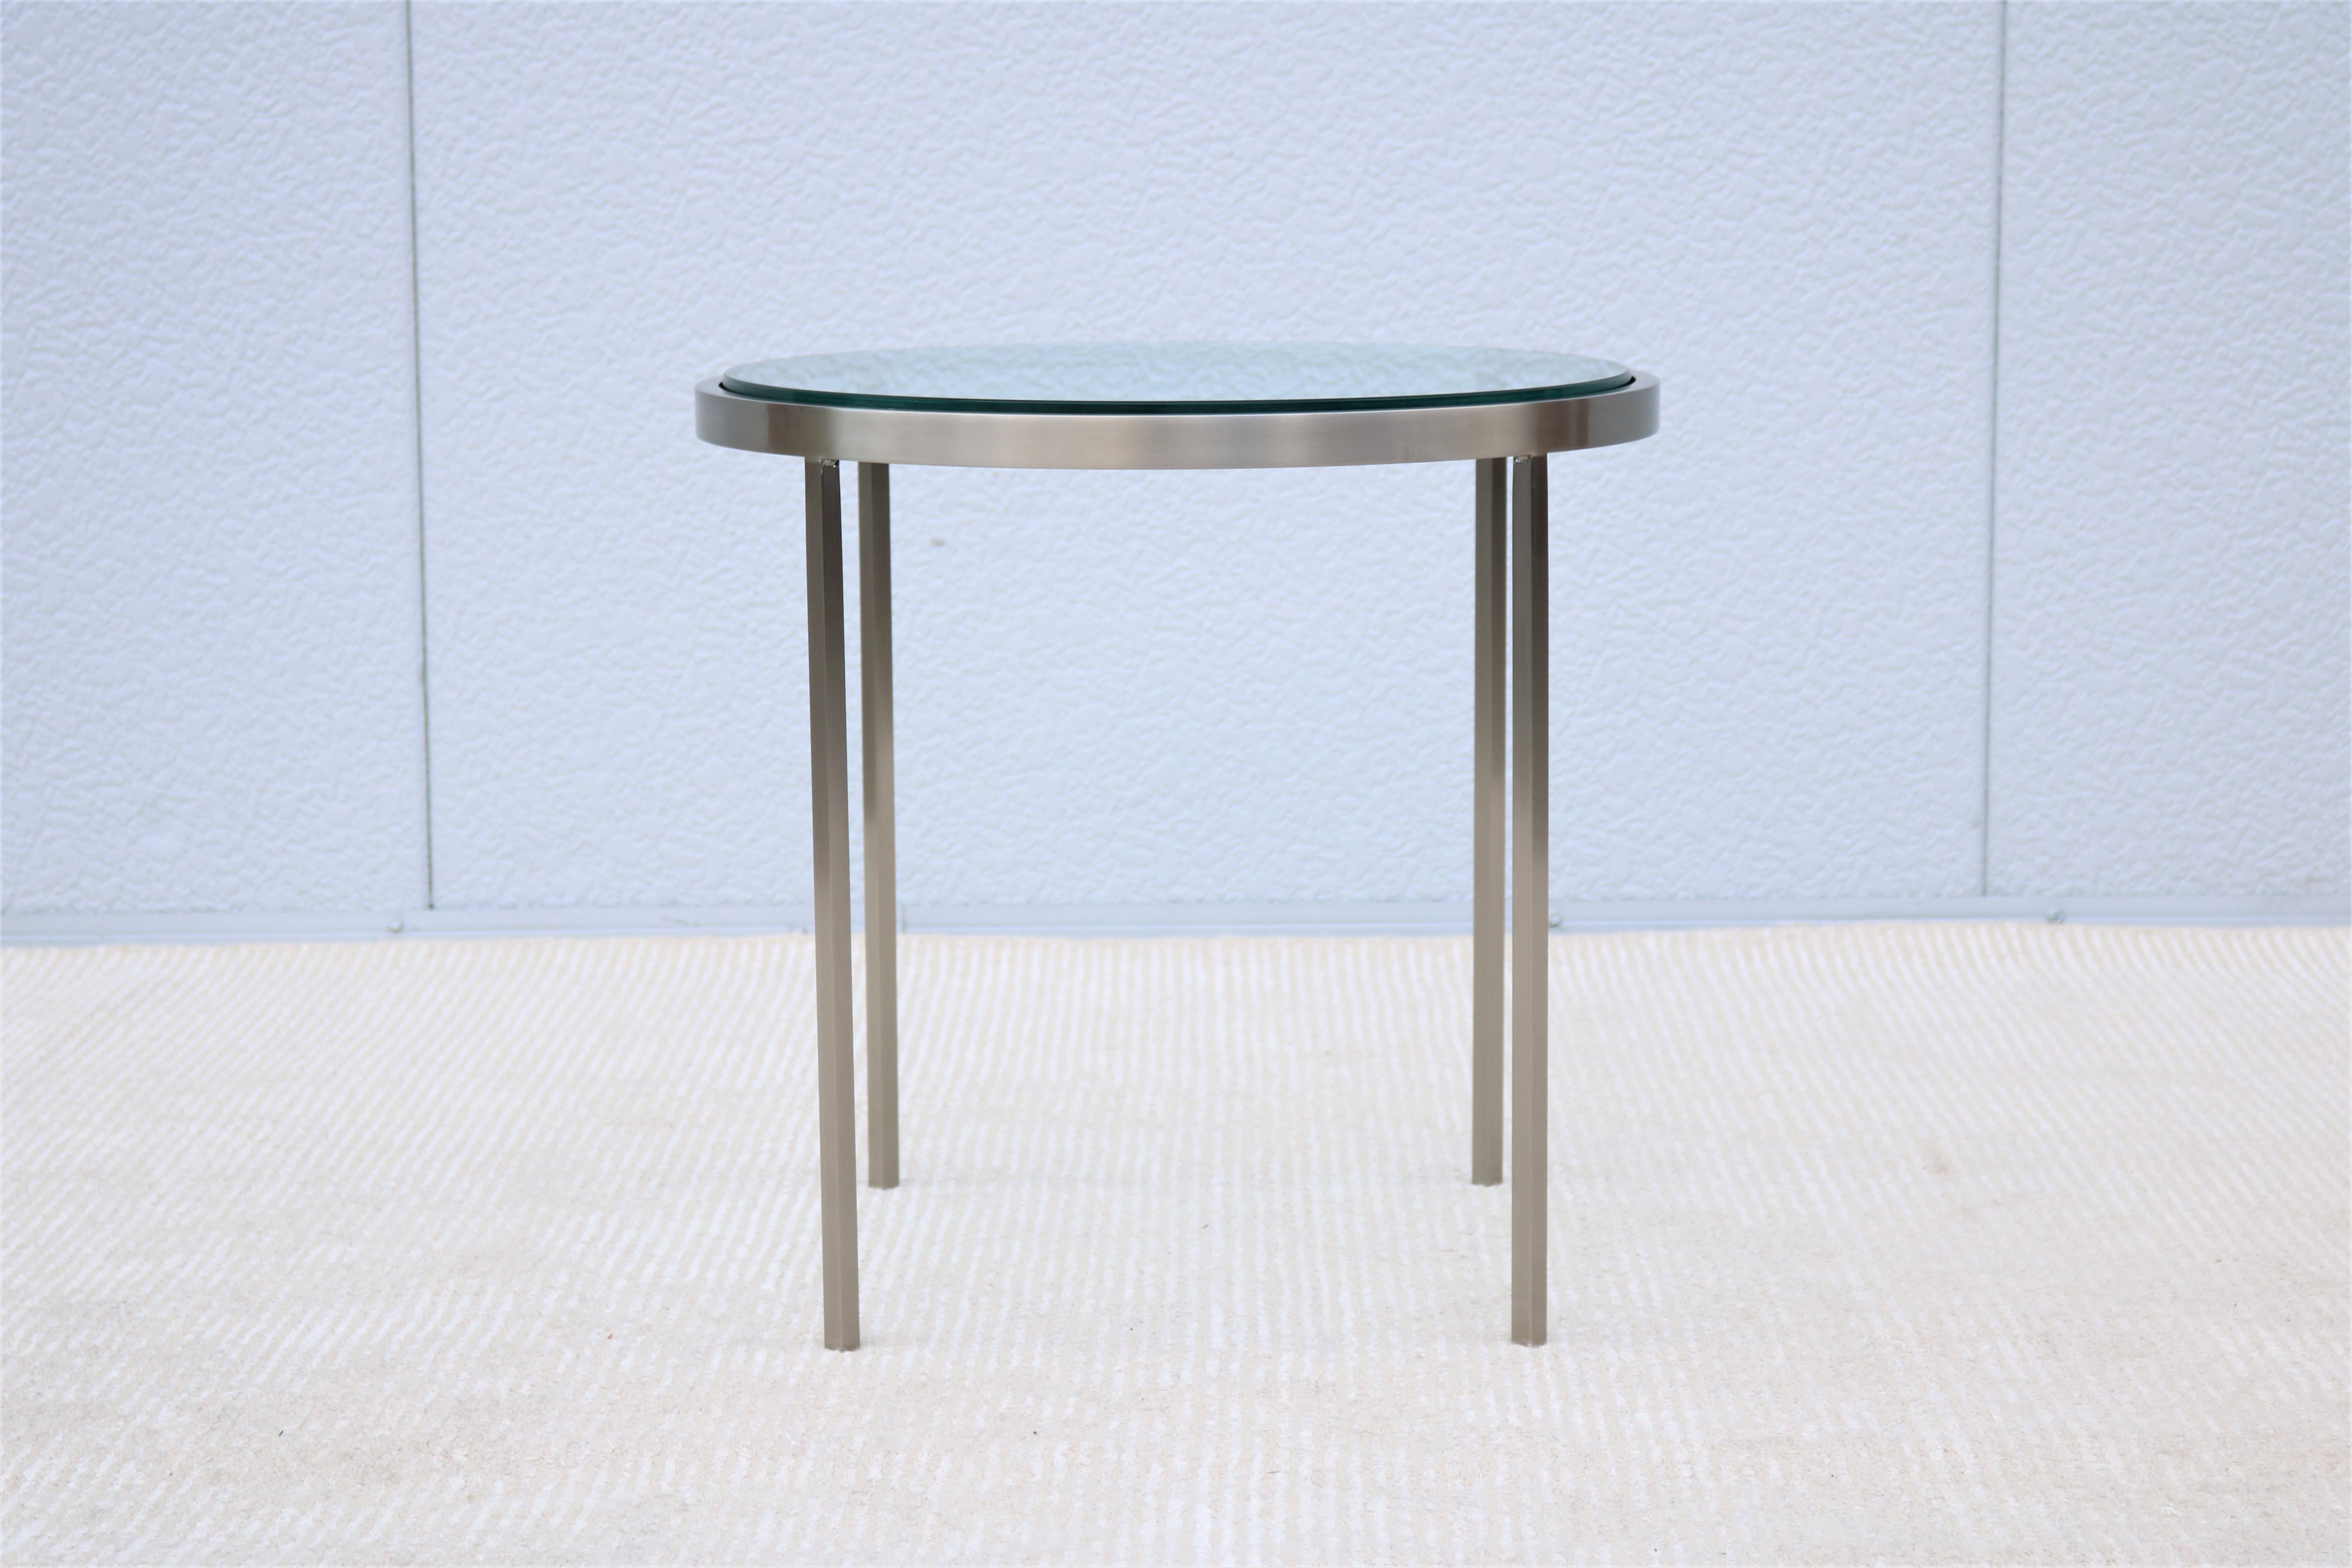 American Mid-Century Modern Milo Baughman Round Glass and Stainless-Steel Side End Table For Sale